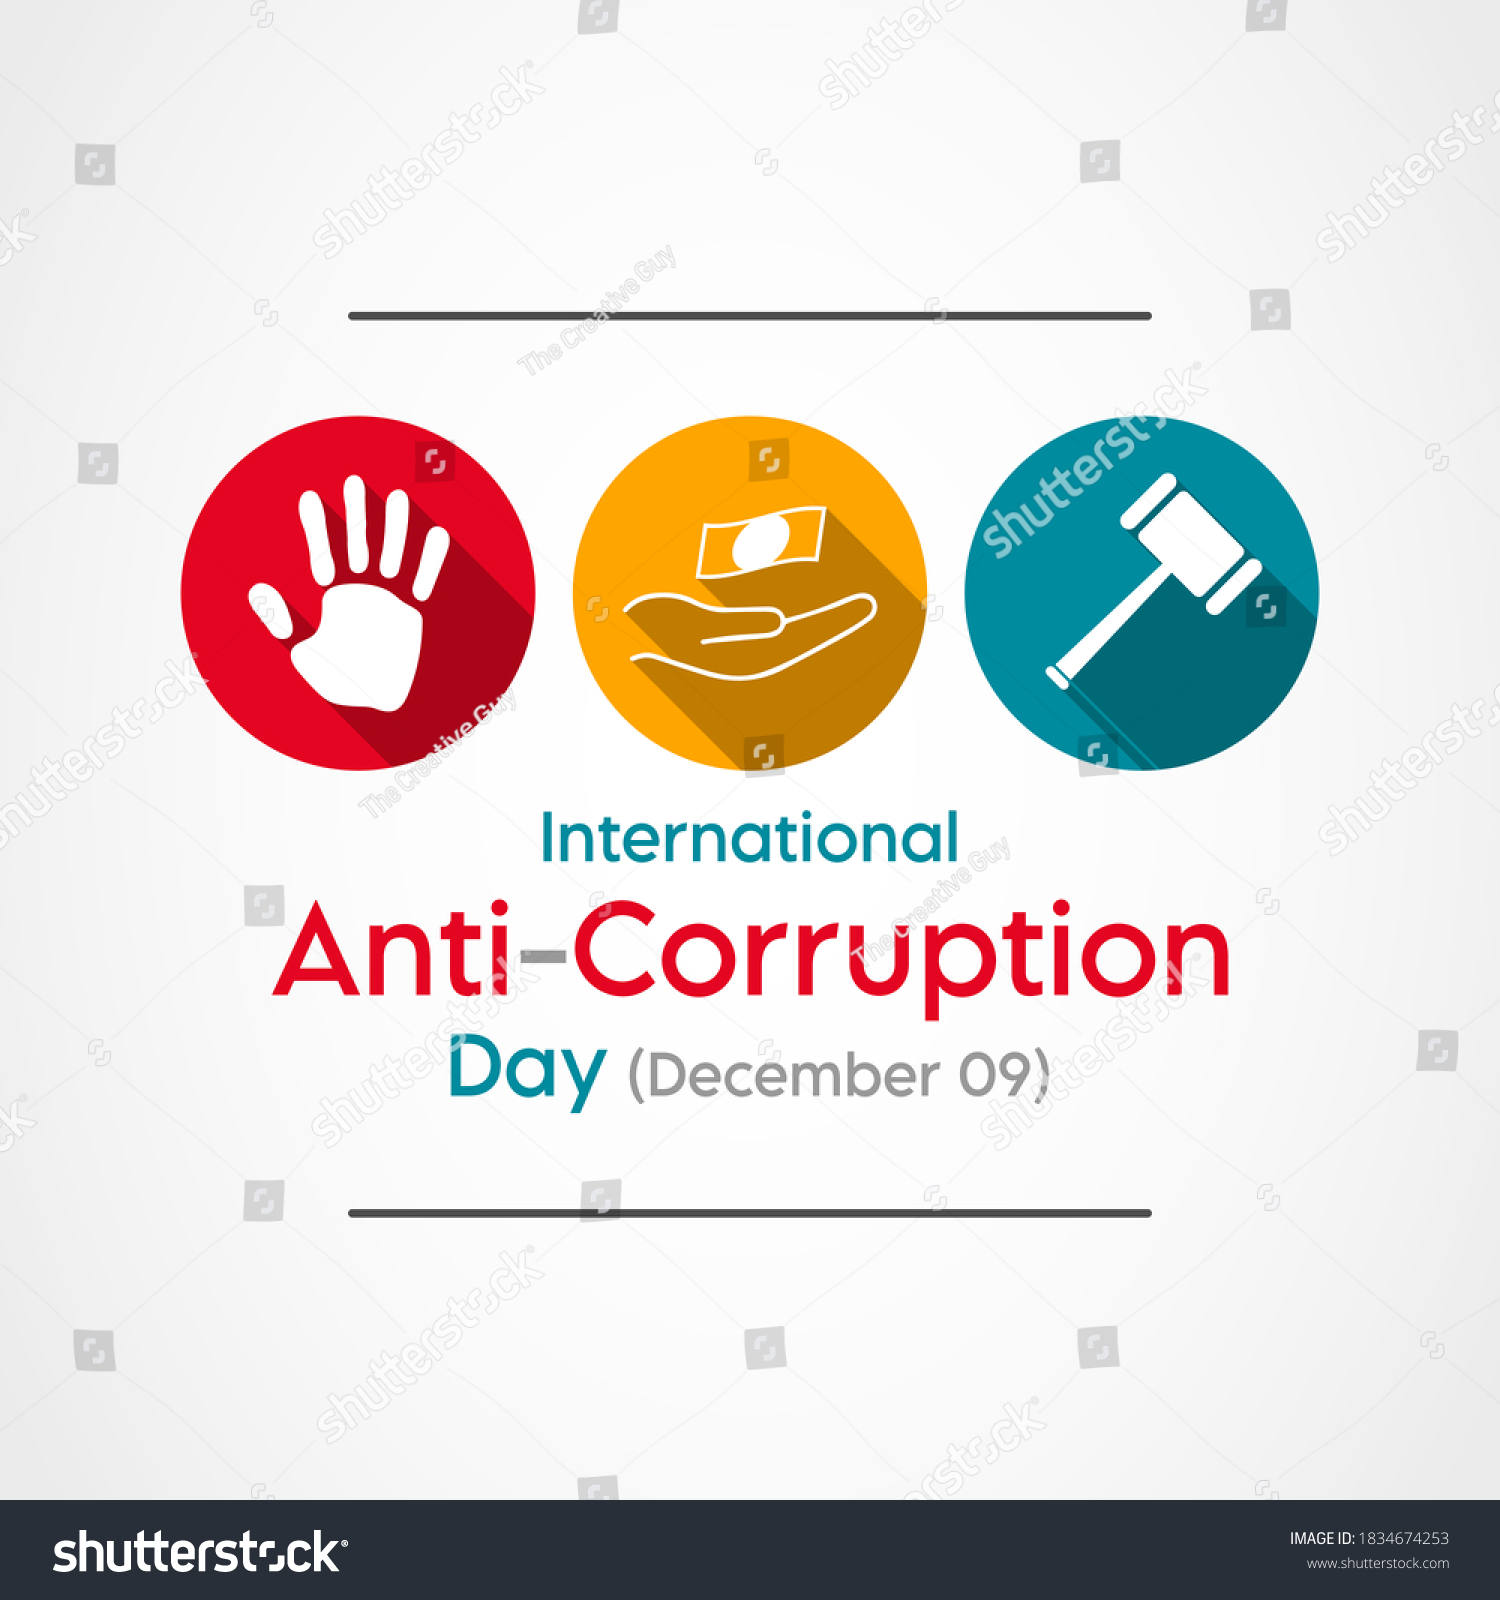 SVG of Vector illustration on the theme of International Anti Corruption day observed each year on December 09th across the globe. svg